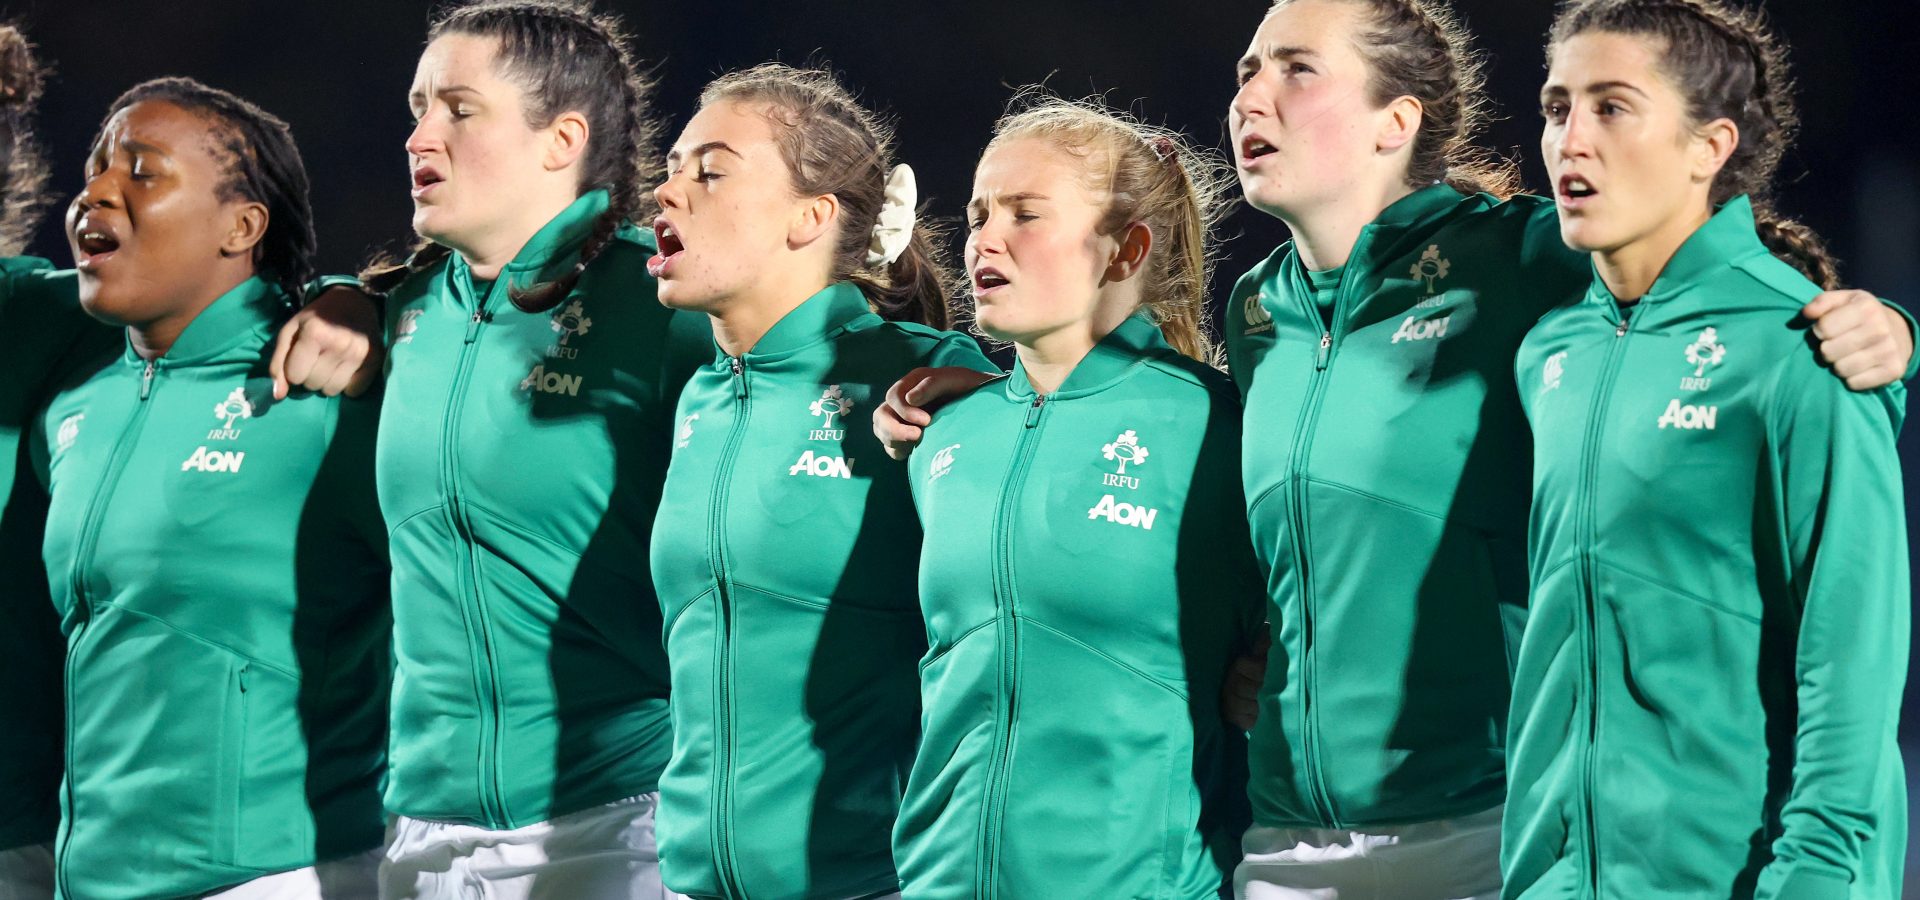 Statement re. Women’s Rugby Review